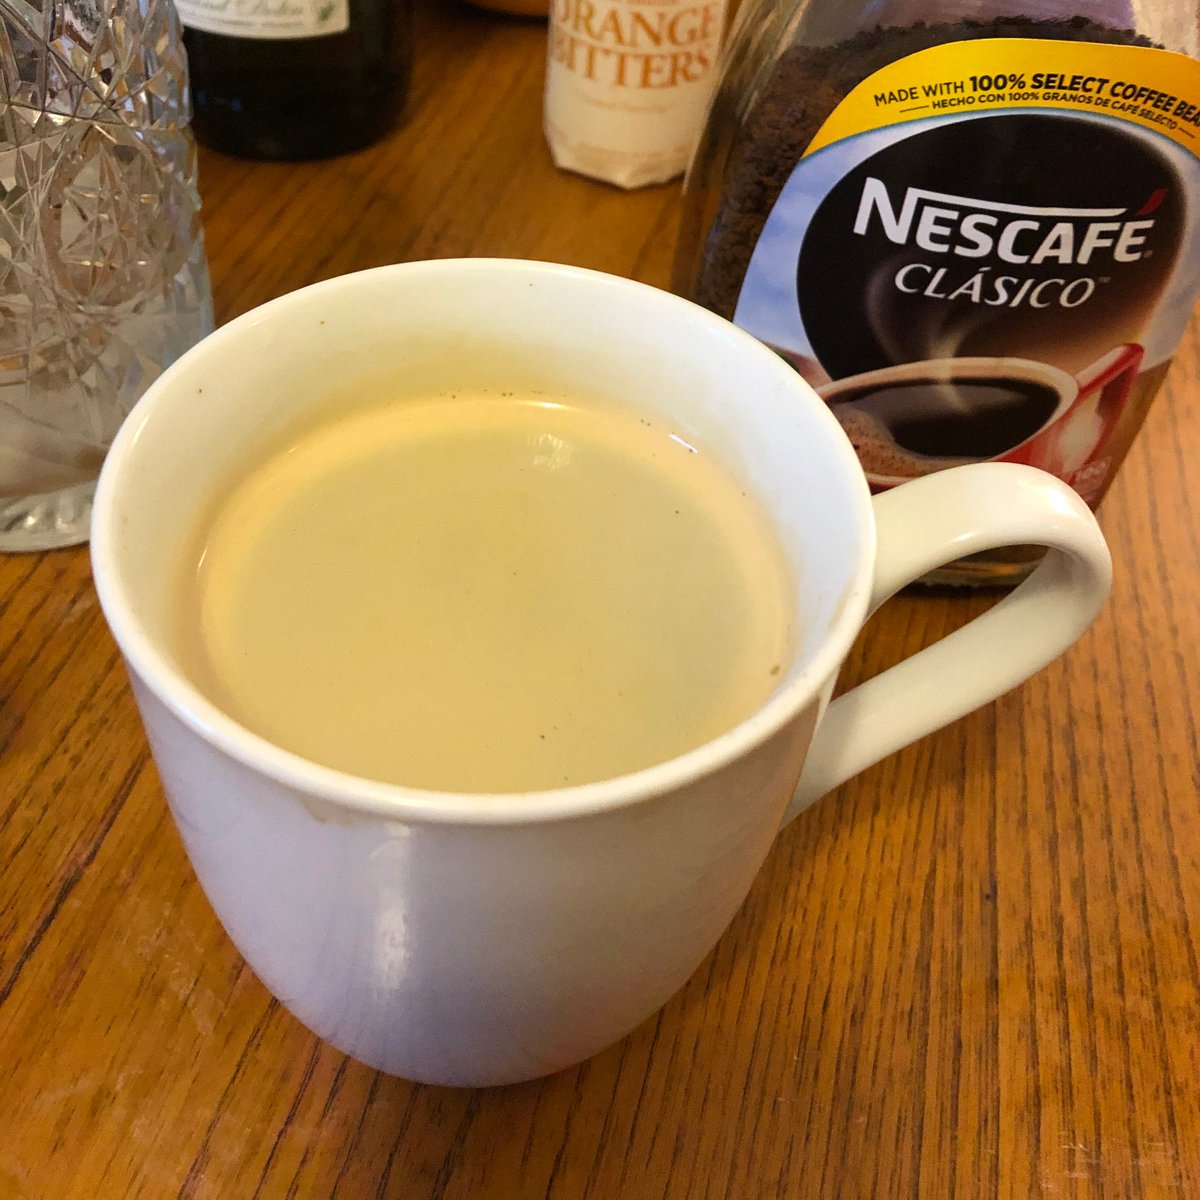 At this point you’ve already had two drinks and it might be wise to balance things out with a coffee. I recommend Nescafé instant coffee, a miracle of the space age invented for Soviet cosmonauts. (11/73)